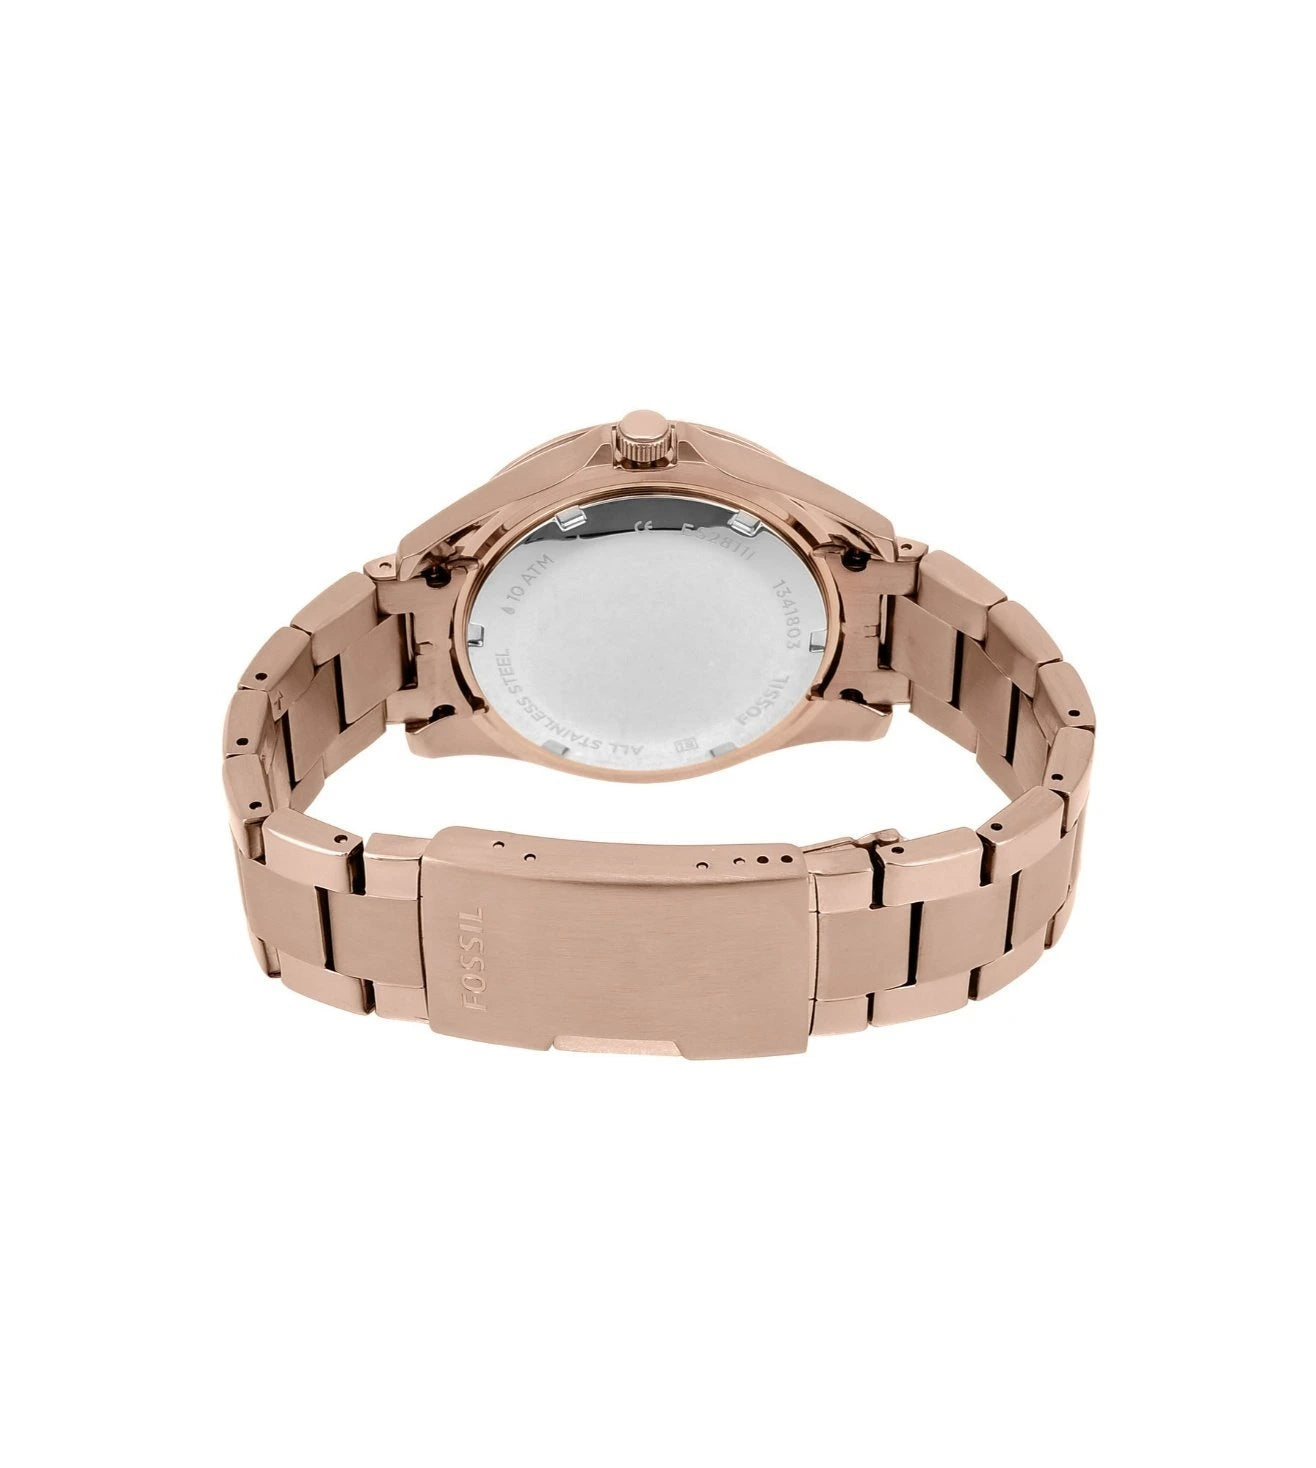 ES2811 | FOSSIL Riley Multifunction Analog Watch for Women